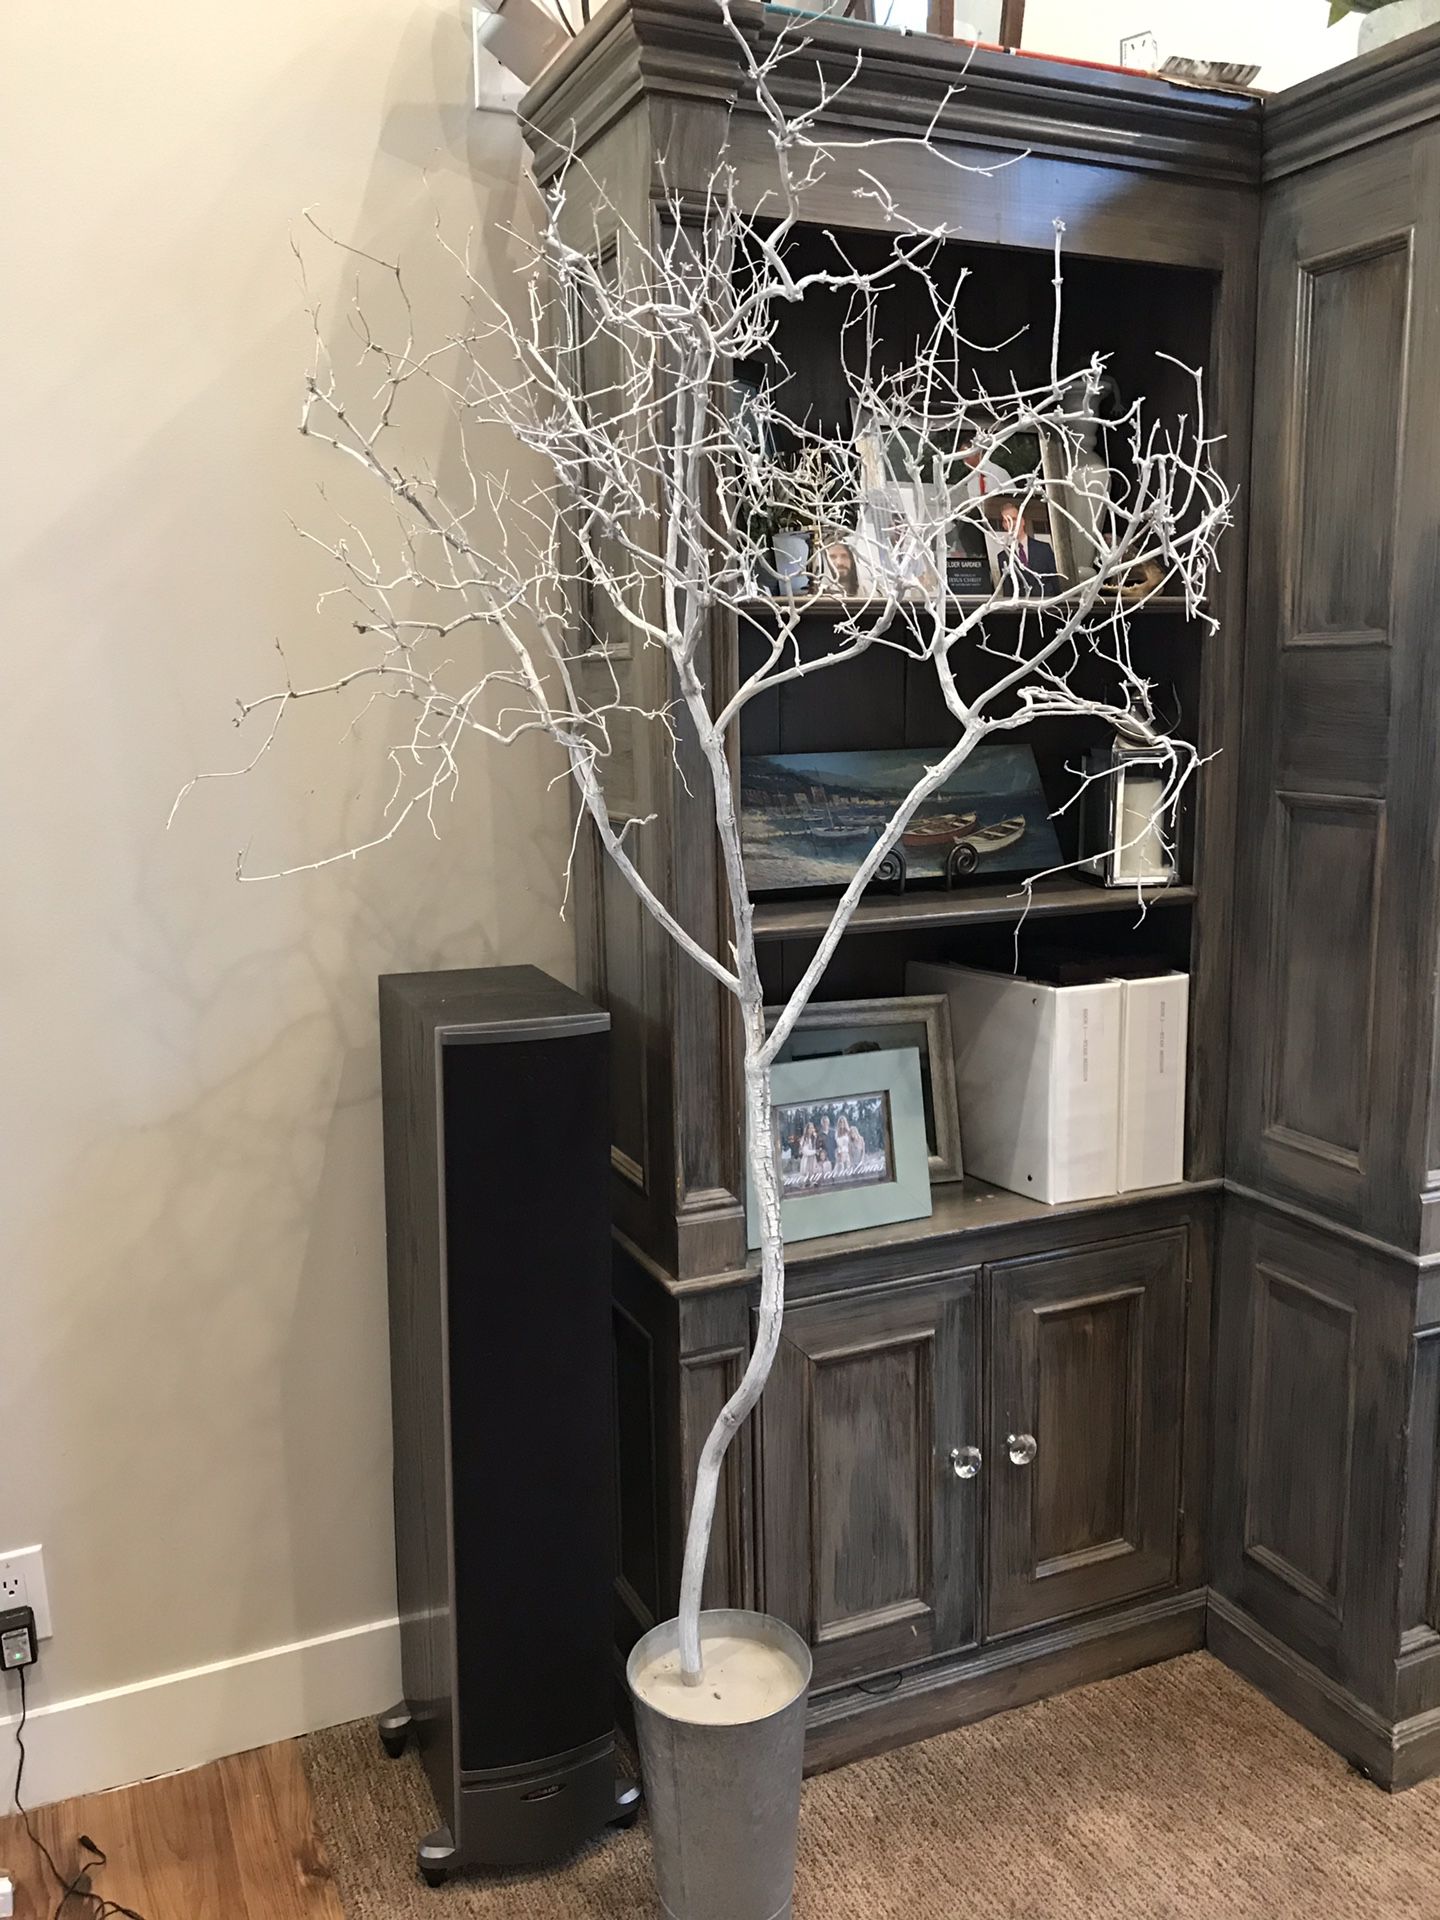 6 feet tall White dried decoration tree cemented in silver plant pot